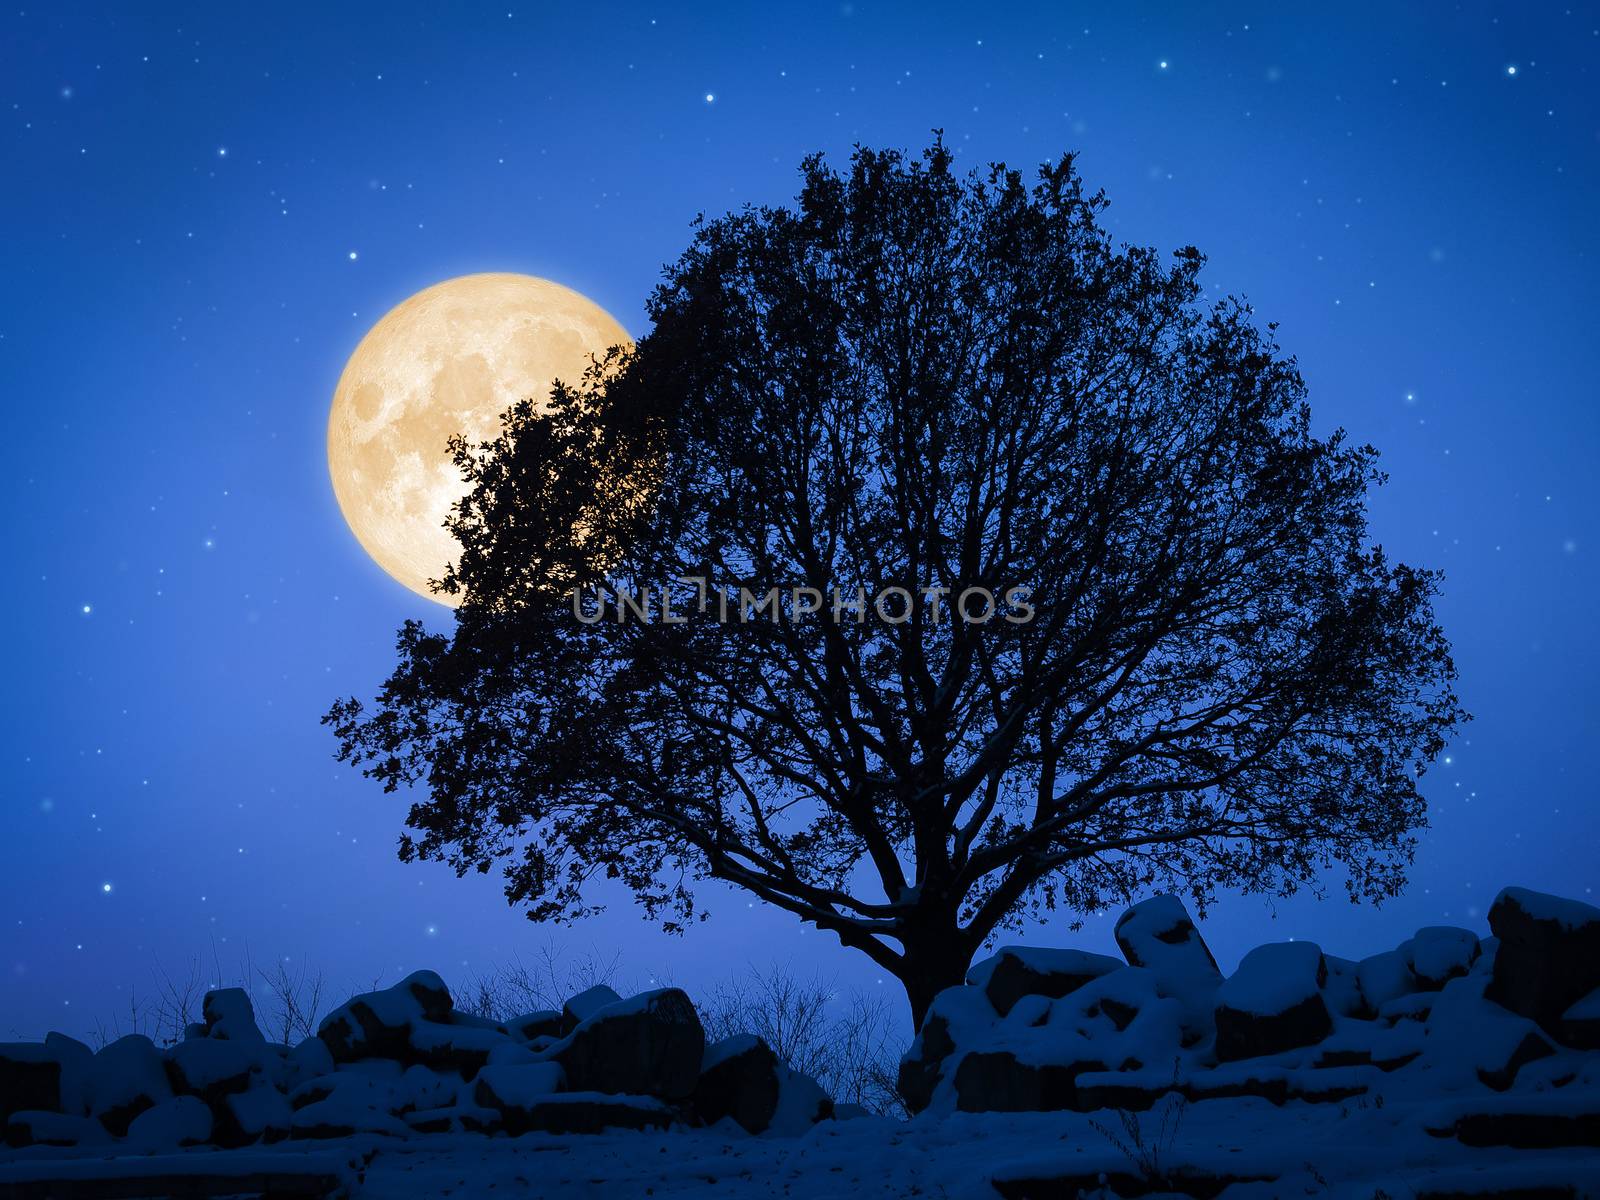 An image of a tree at night with pale moon